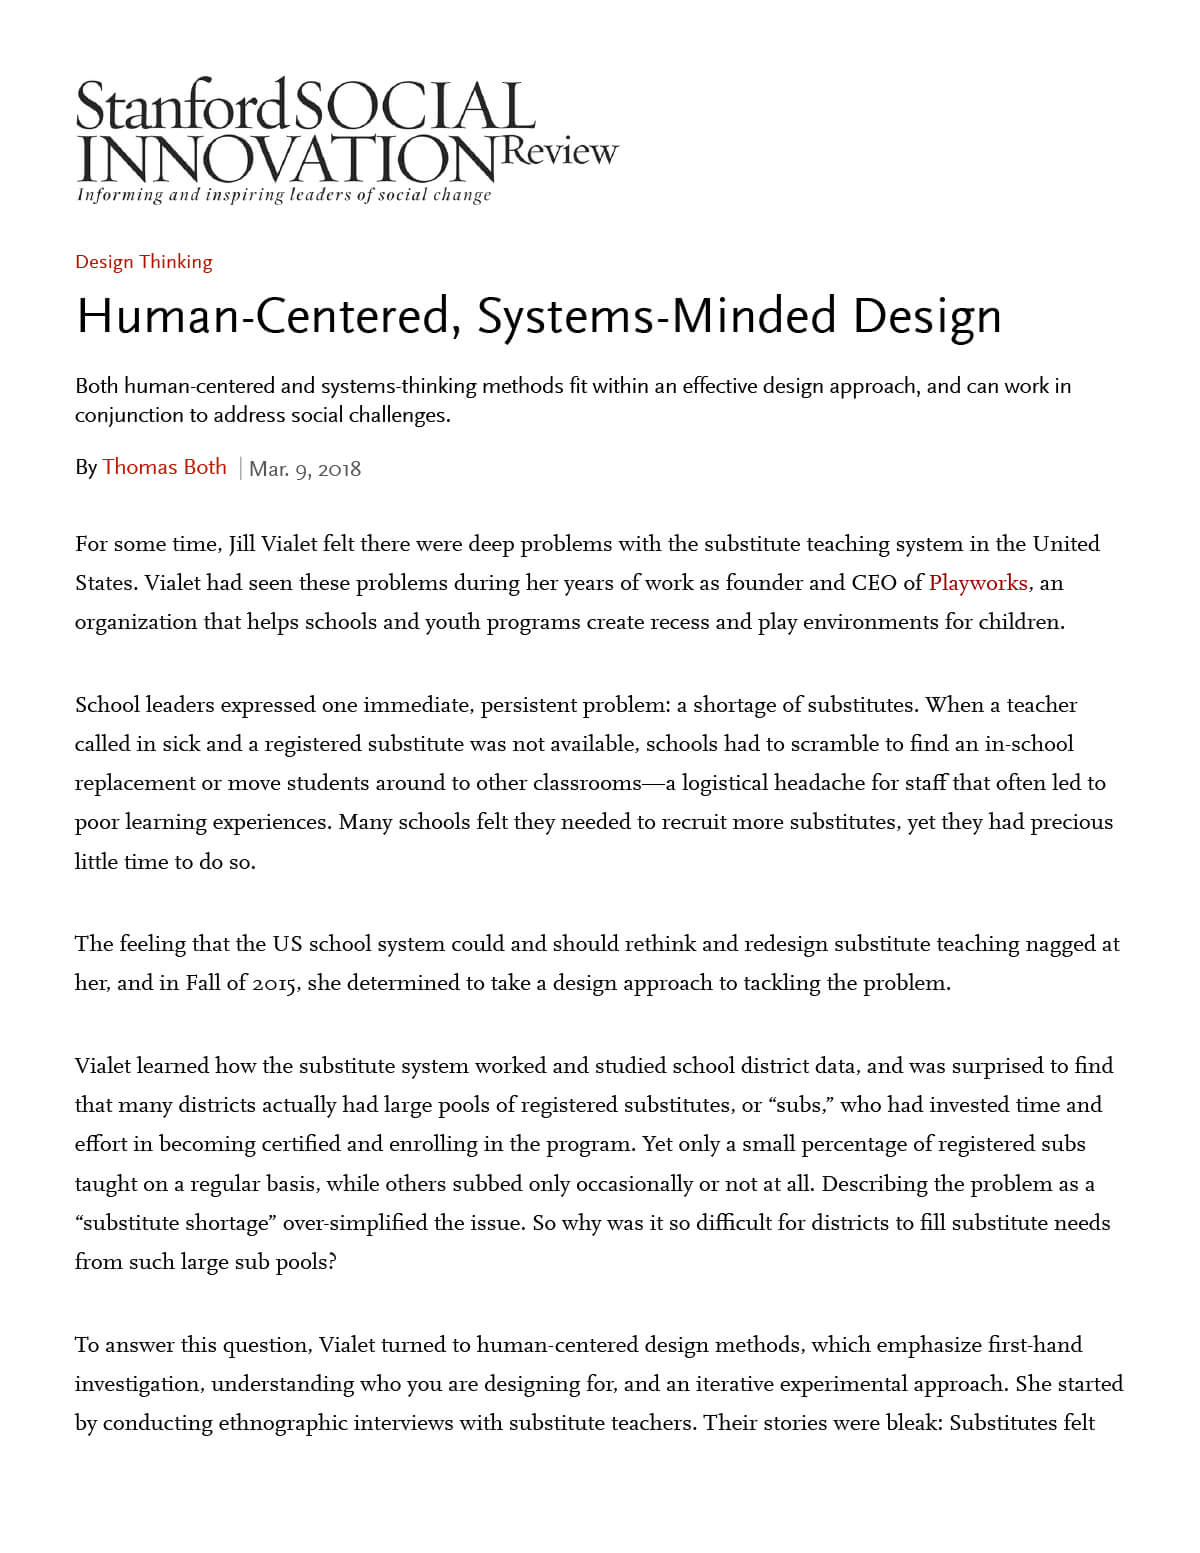 Human-Centered, Systems-Minded Design - Stanford Social Innovation Review